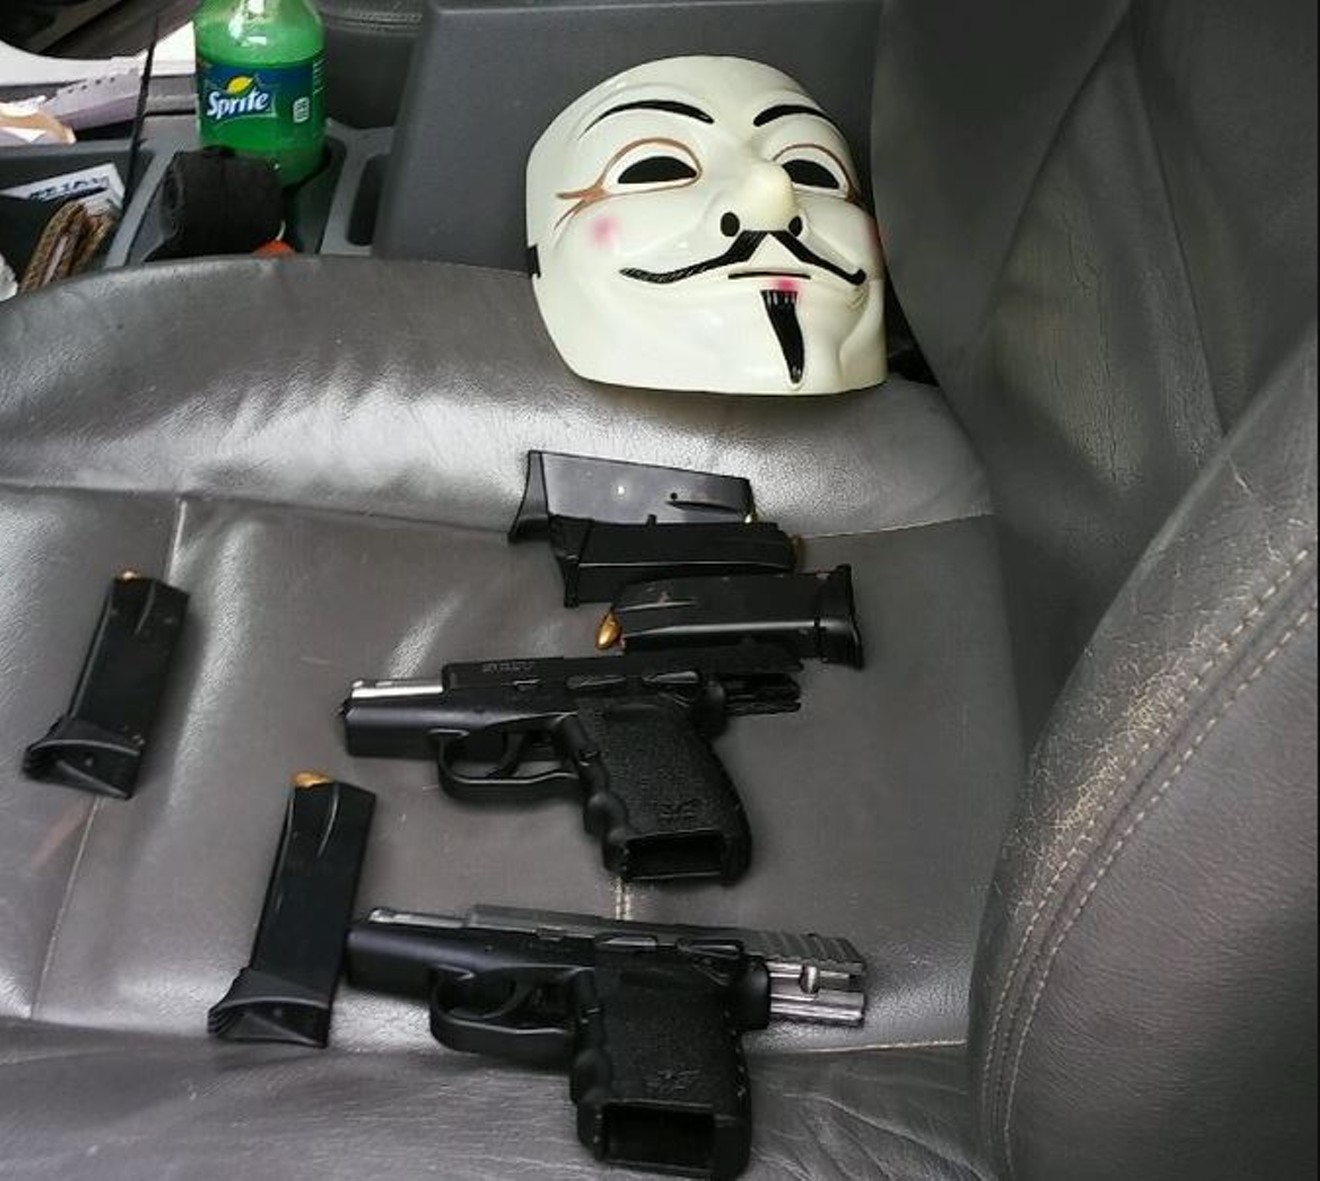 The handguns and Guy Fawkes mask inside the Durango.